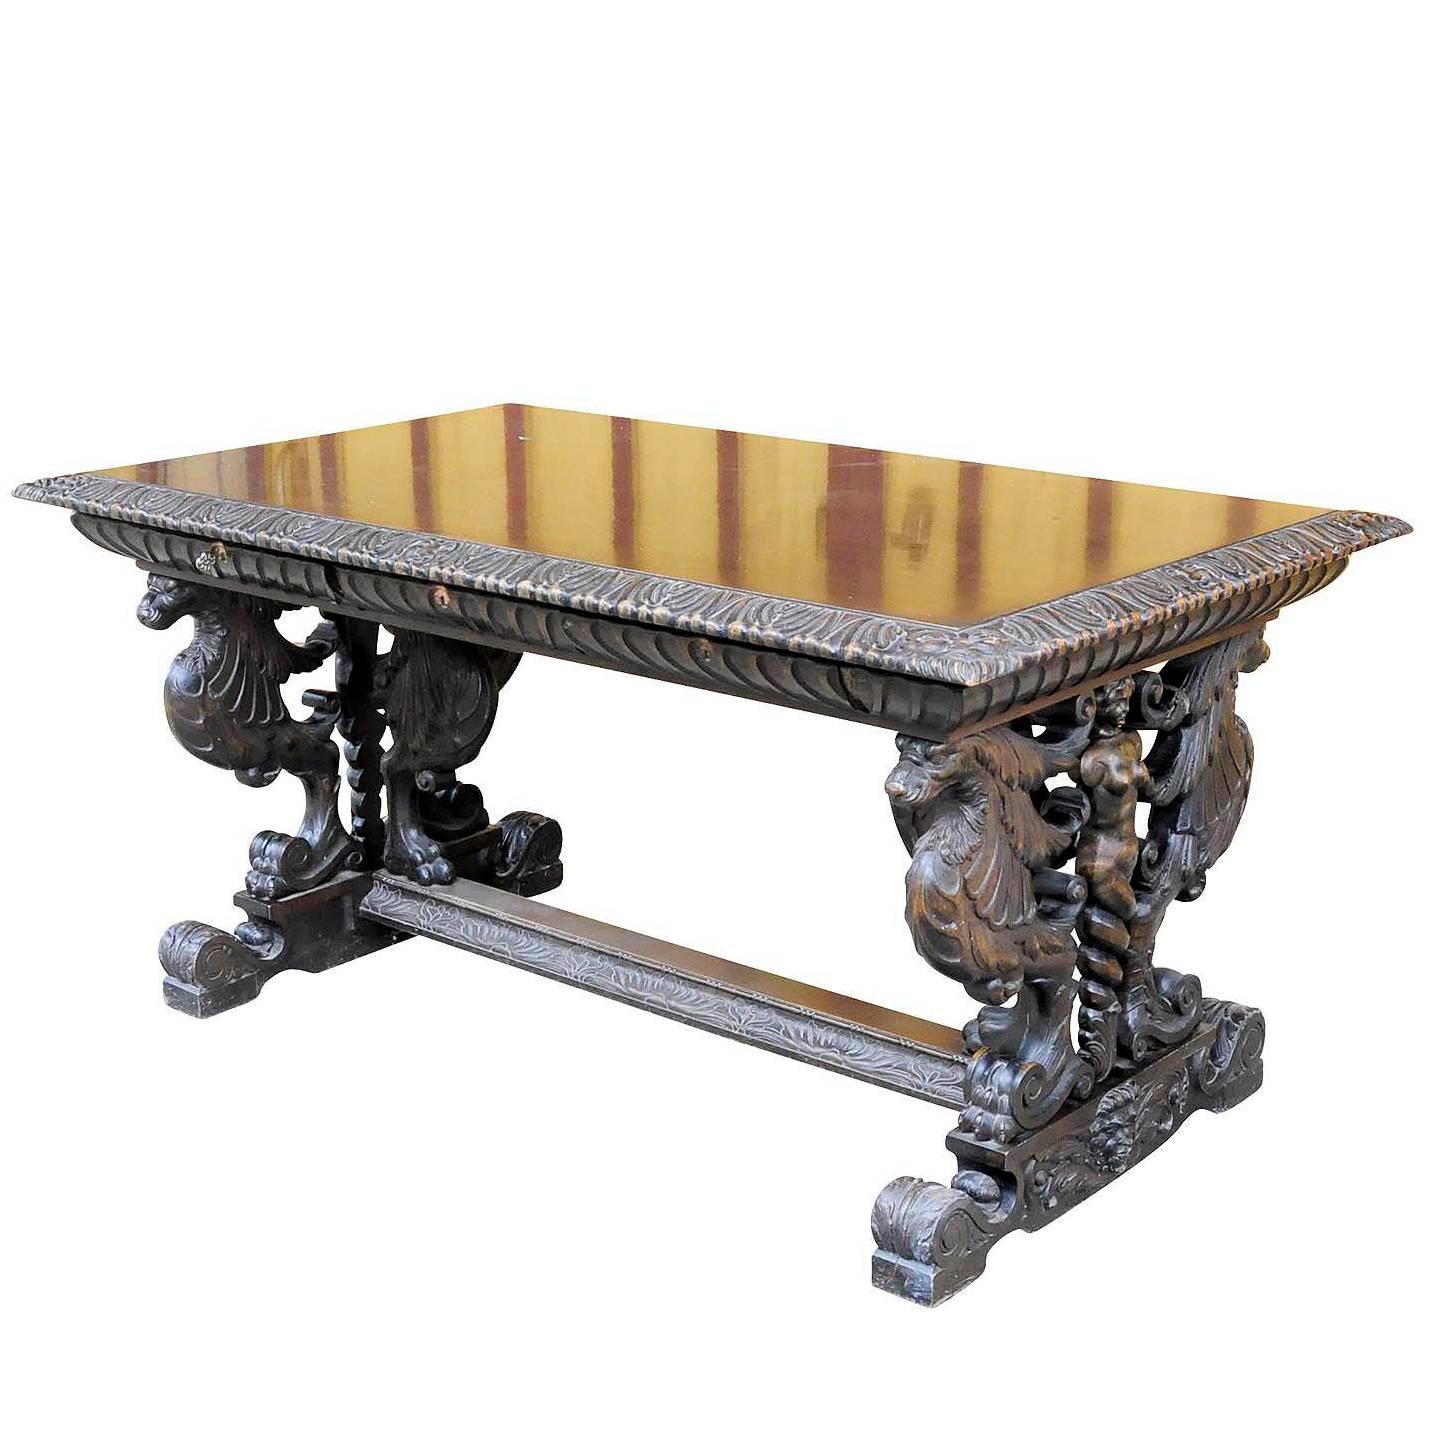 Great Renaissance Style Desk with Elaborate Carvings